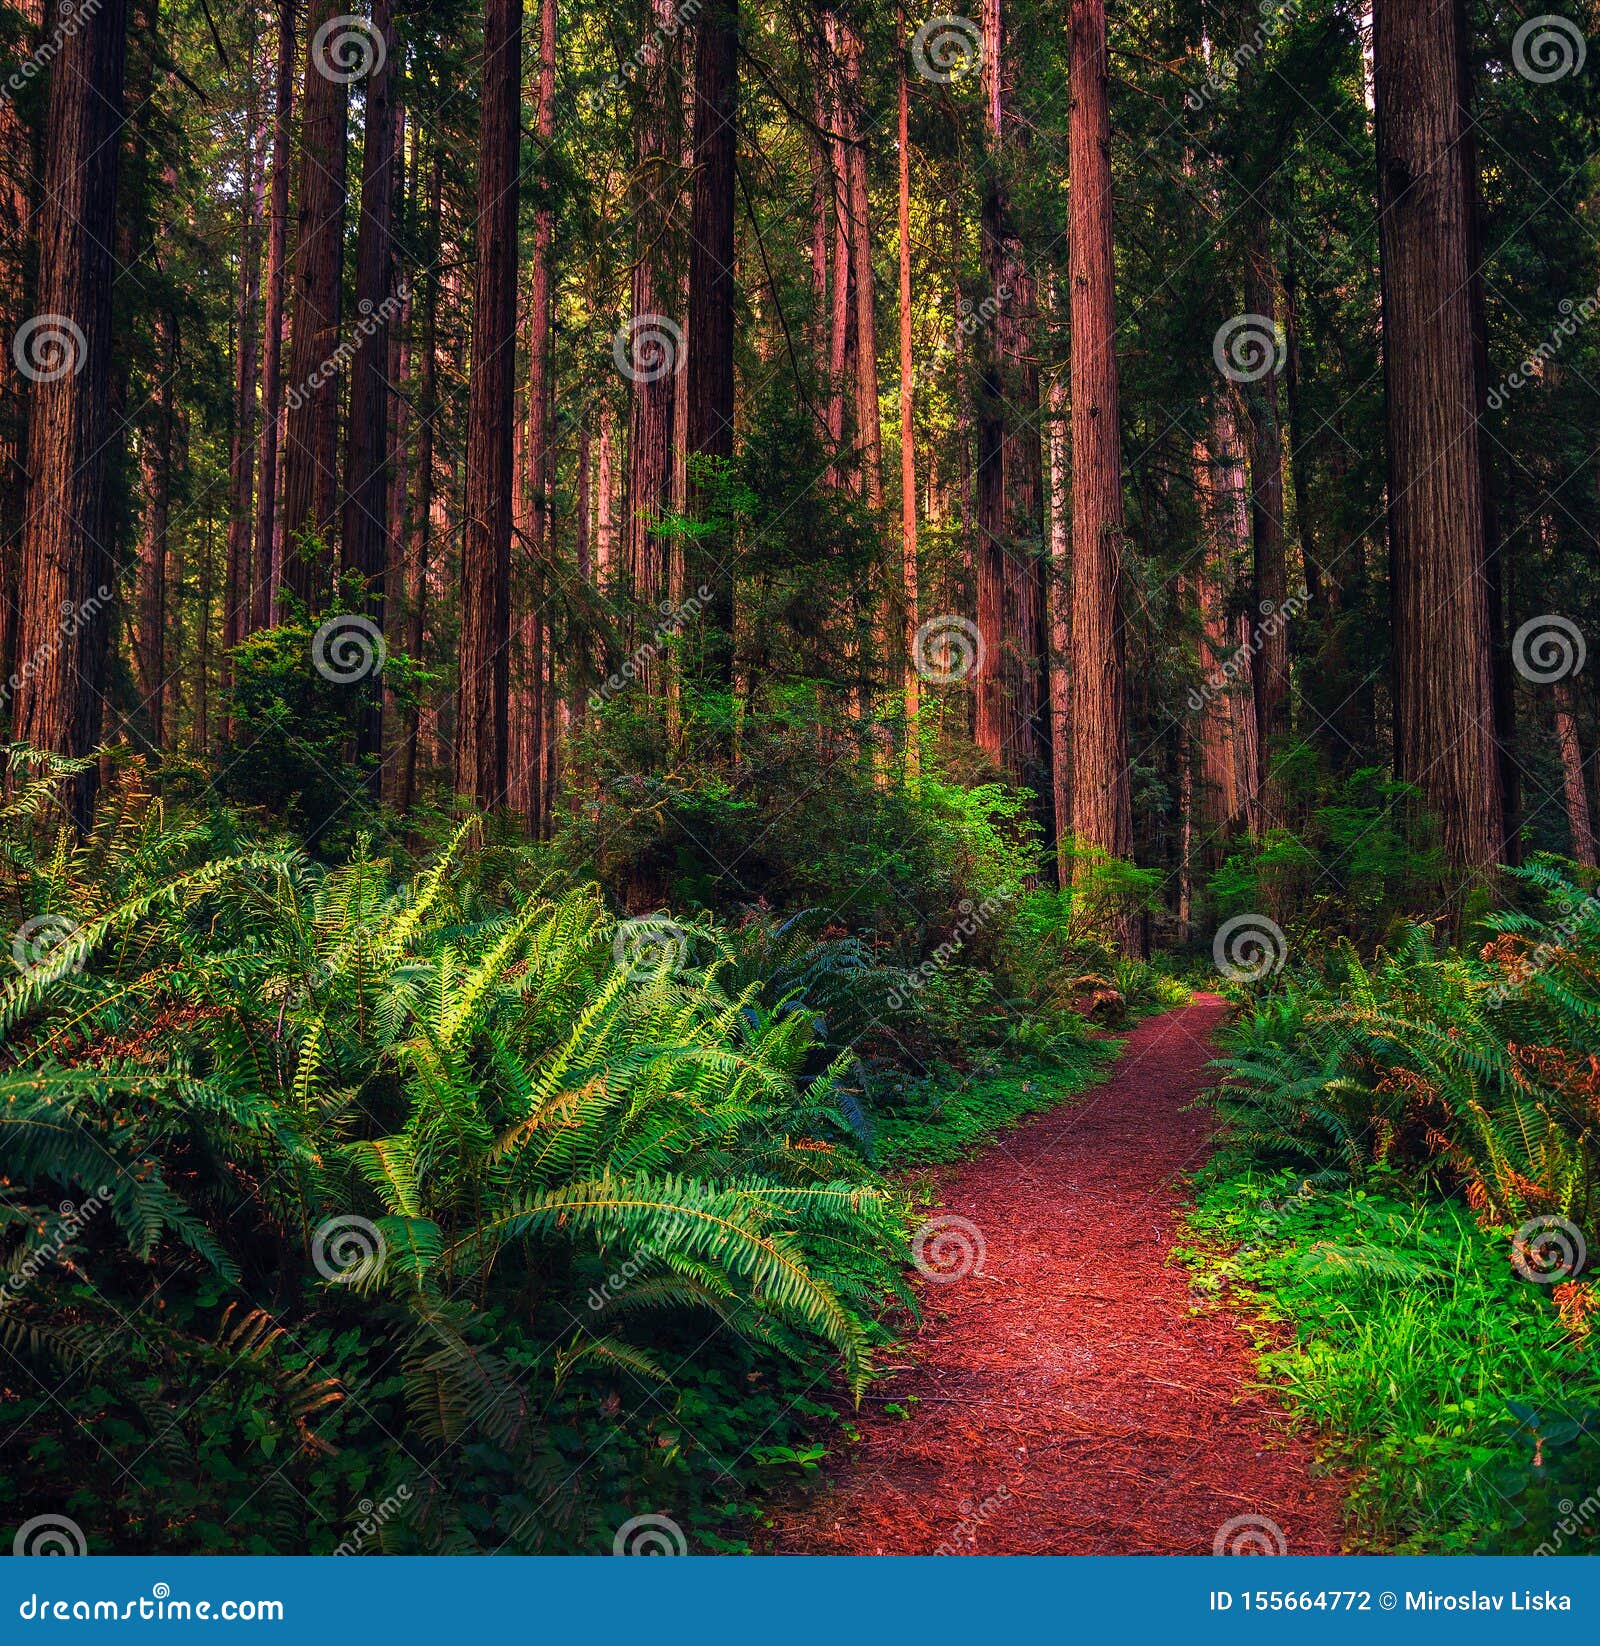 hiking trail through a redwood forest in northern california